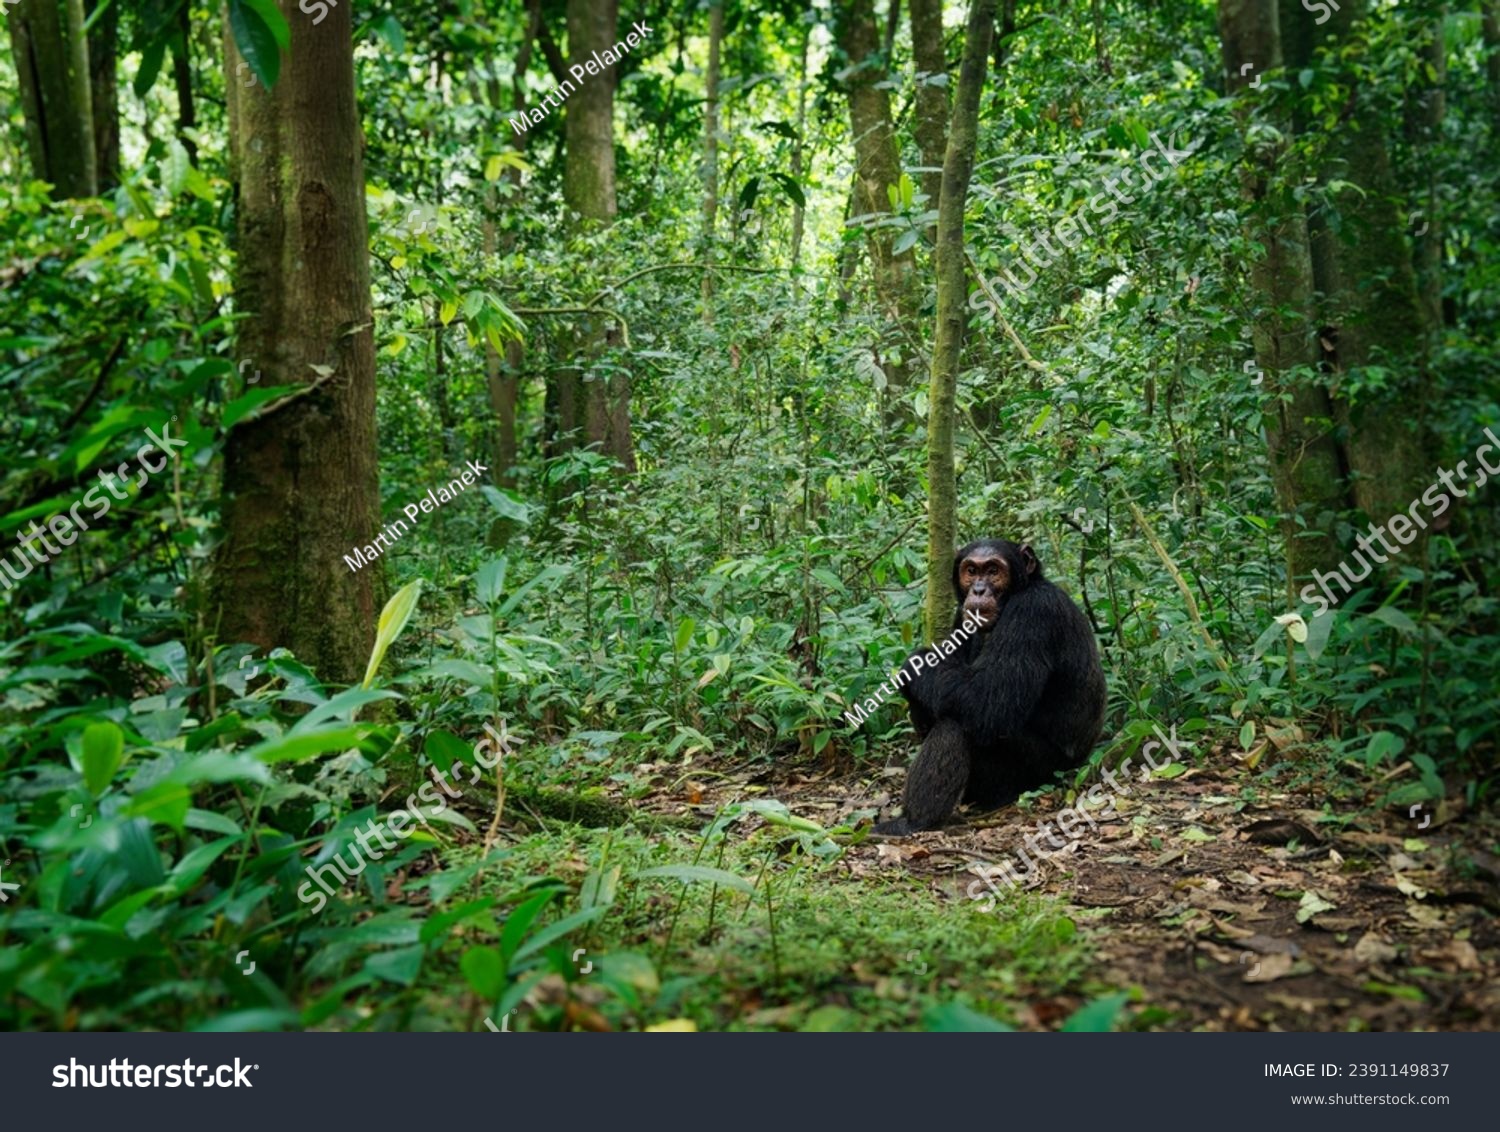 Common or Robust Chimpanzee - Pan troglodytes also chimp, great ape native to the forest and savannah of tropical Africa, humans closest living relative, in the rainforest of Uganda, Cameroon, Congo. #2391149837